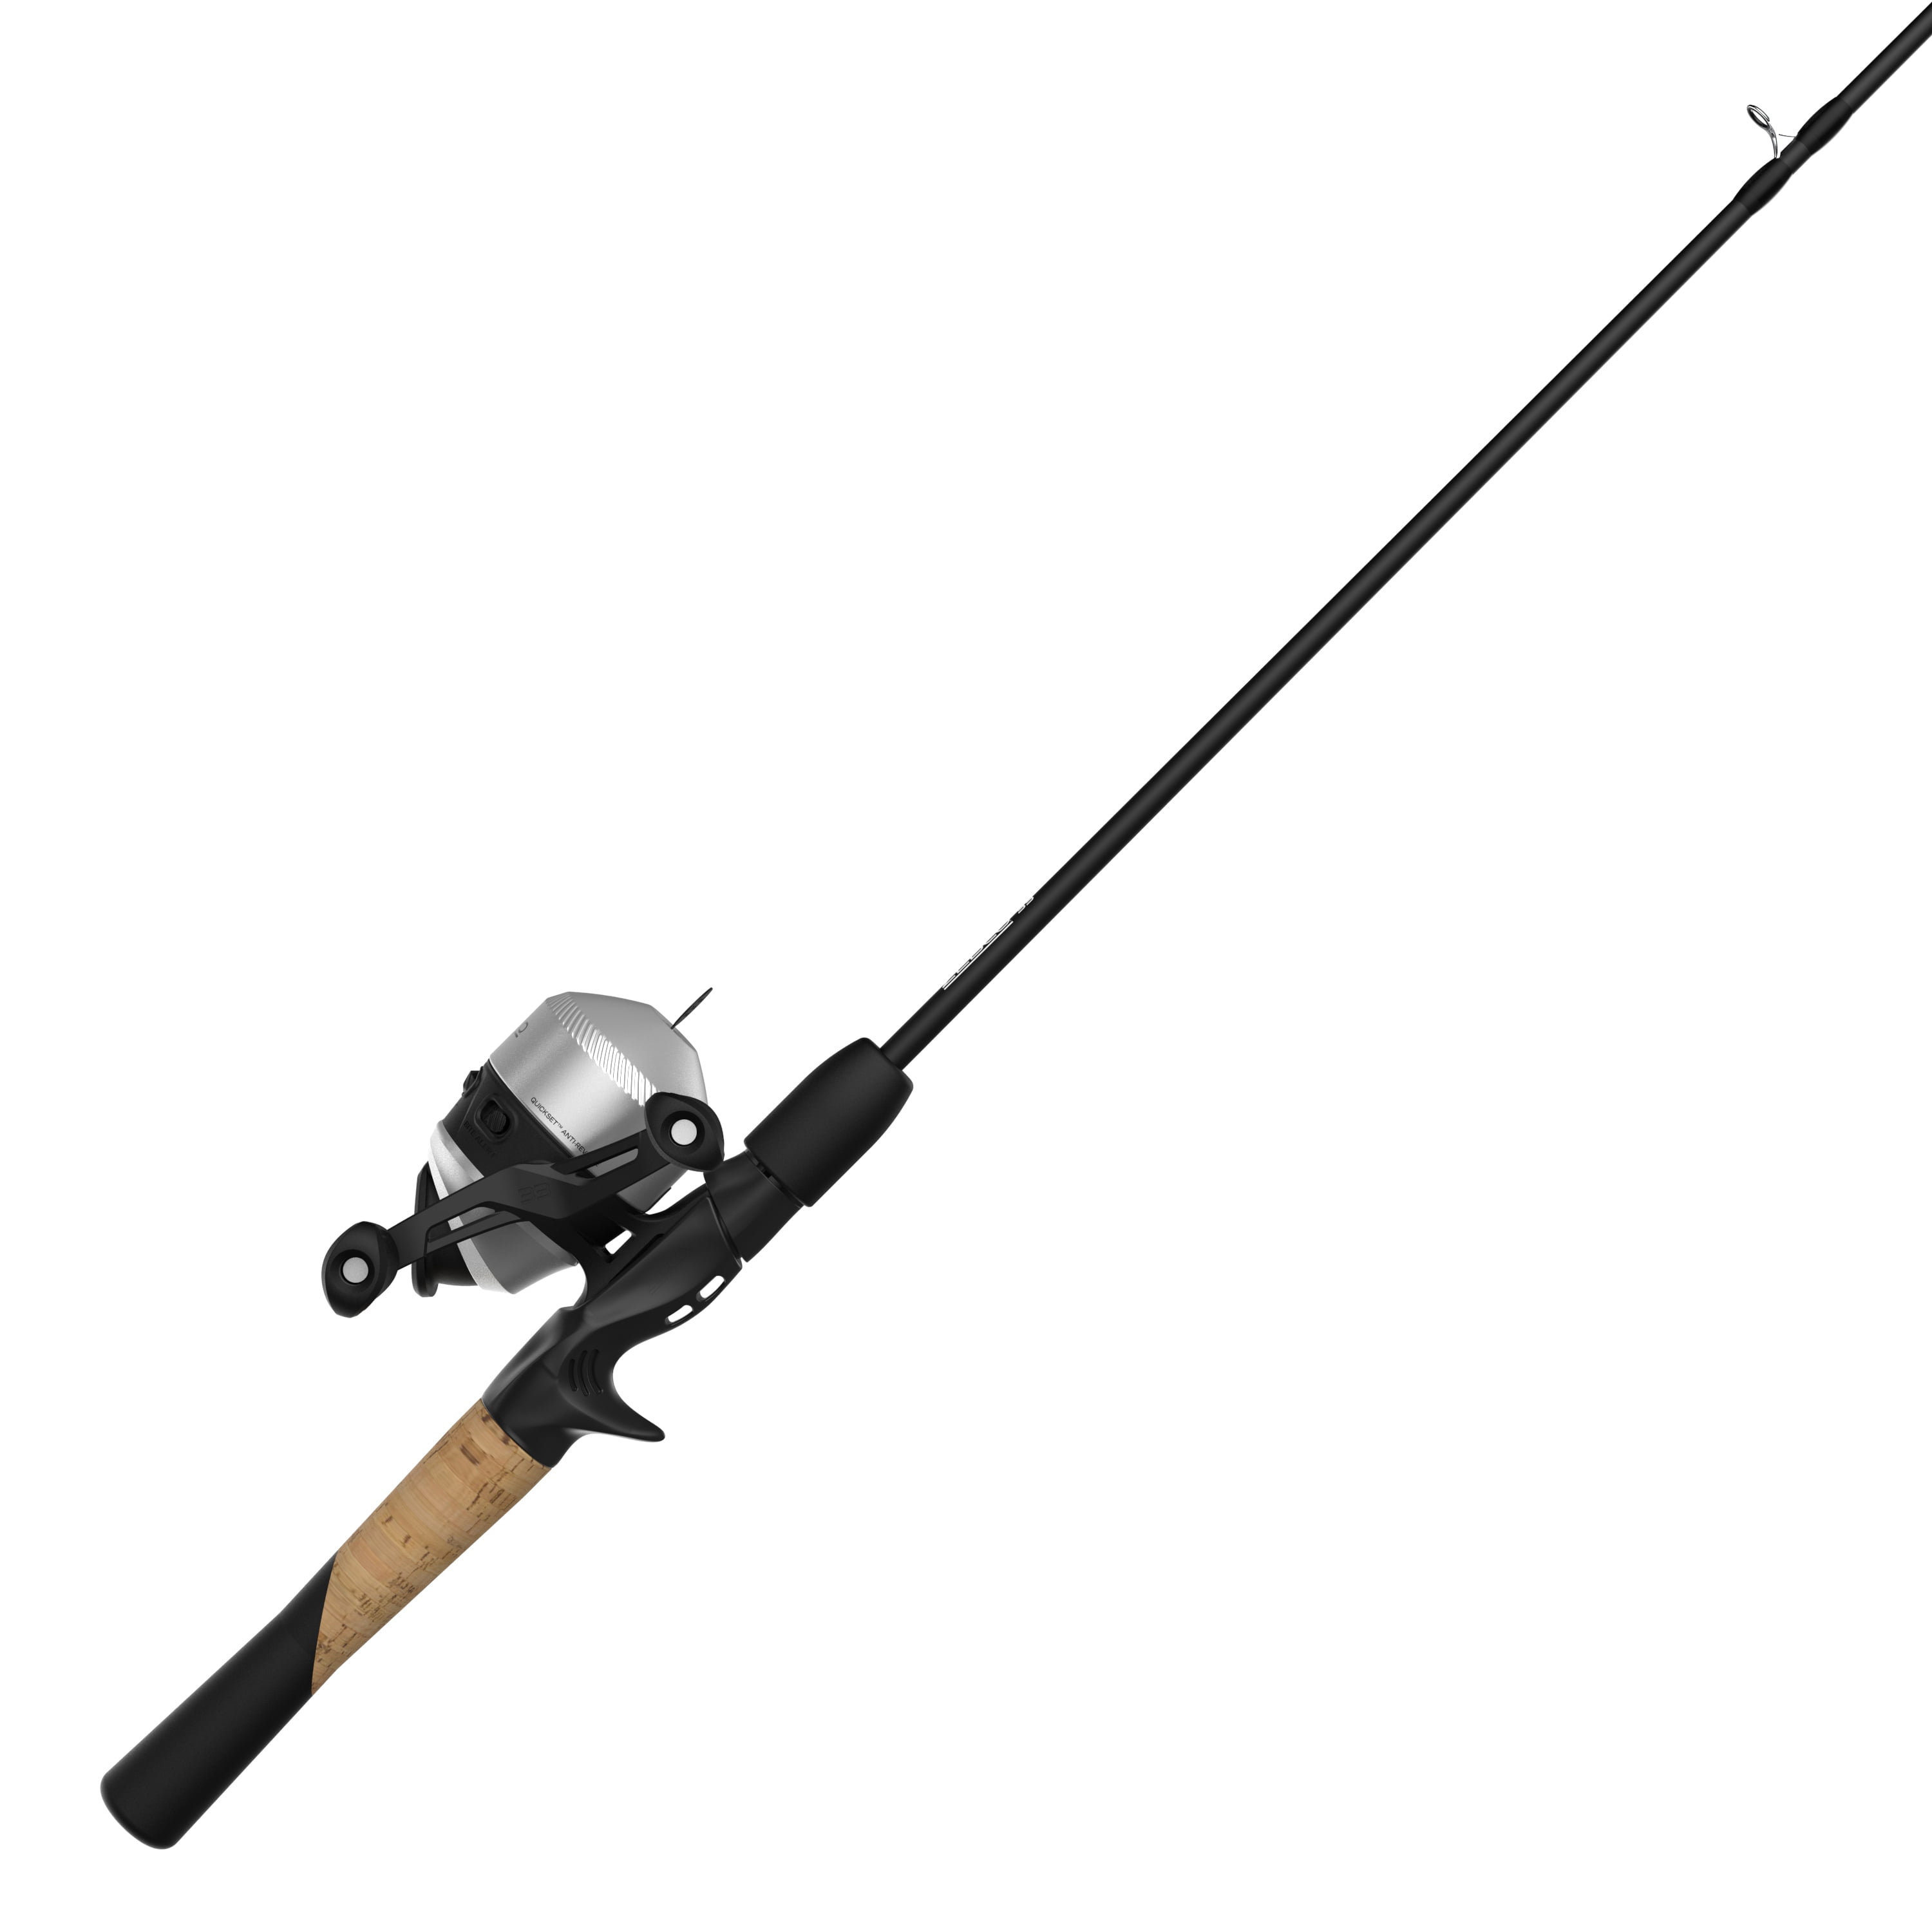 Zebco 33 Telescopic Extends To 5' Easy Transport Micro Ultra Light Fishing Rod 